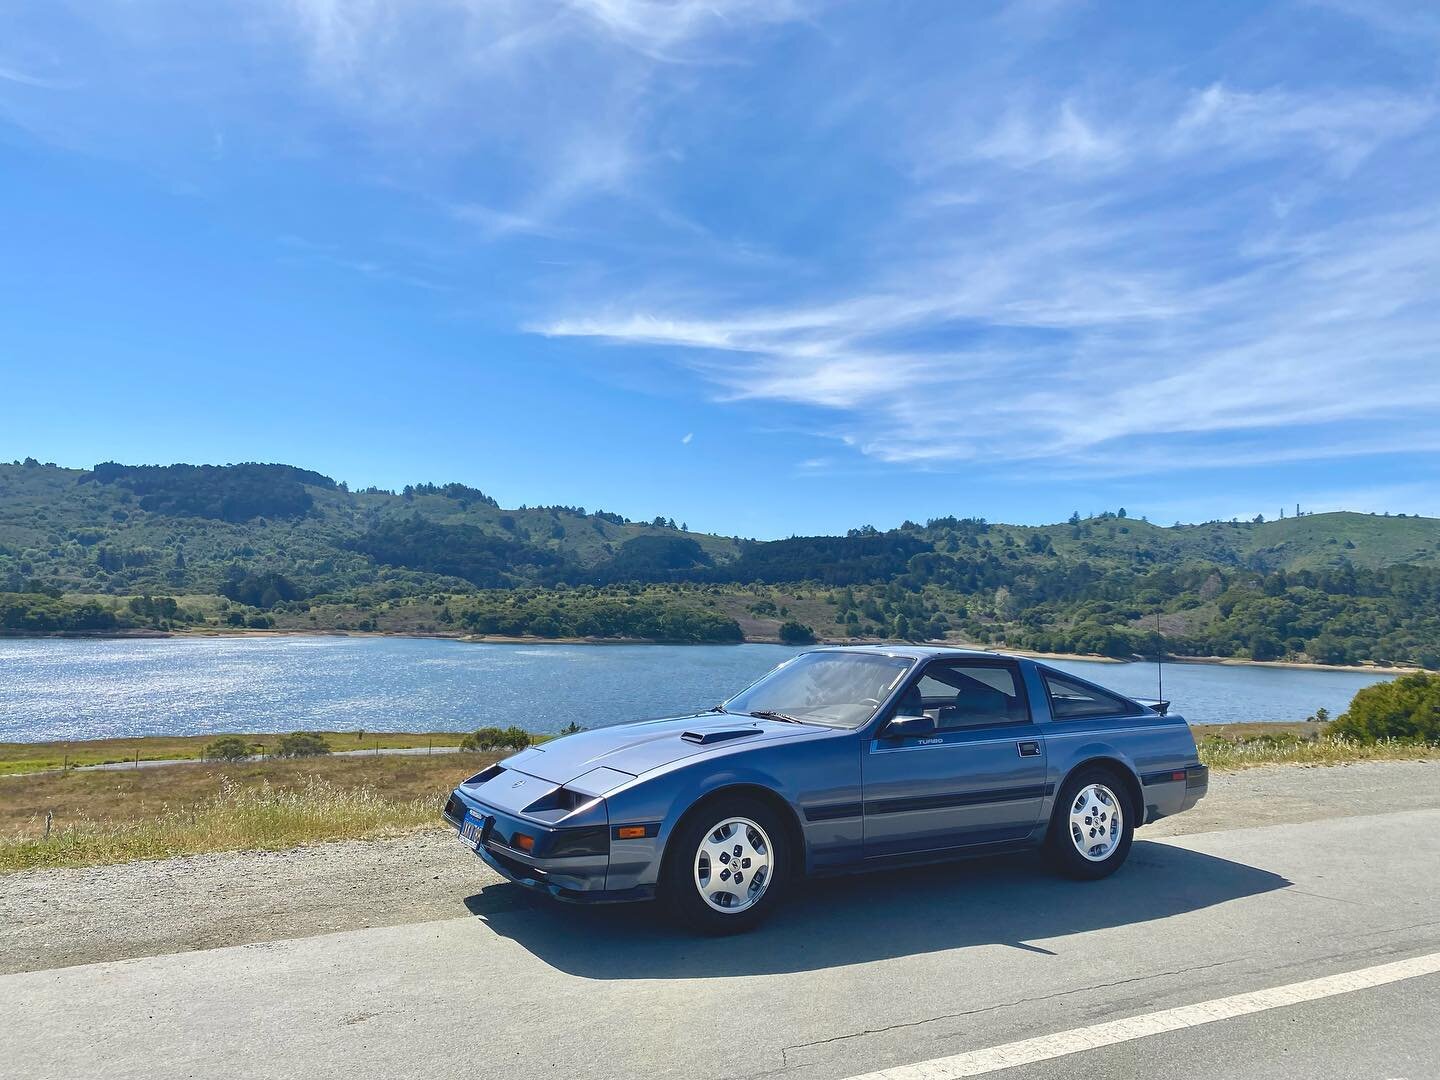 Miles initially asked if we would work on his low mileage Nissan 300ZX Turbo after seeing the care we put into his brother Max&rsquo;s S54 E36 M3. While we were a bit reserved at first, Miles told us he was at wits&rsquo; end after contacting nearly 